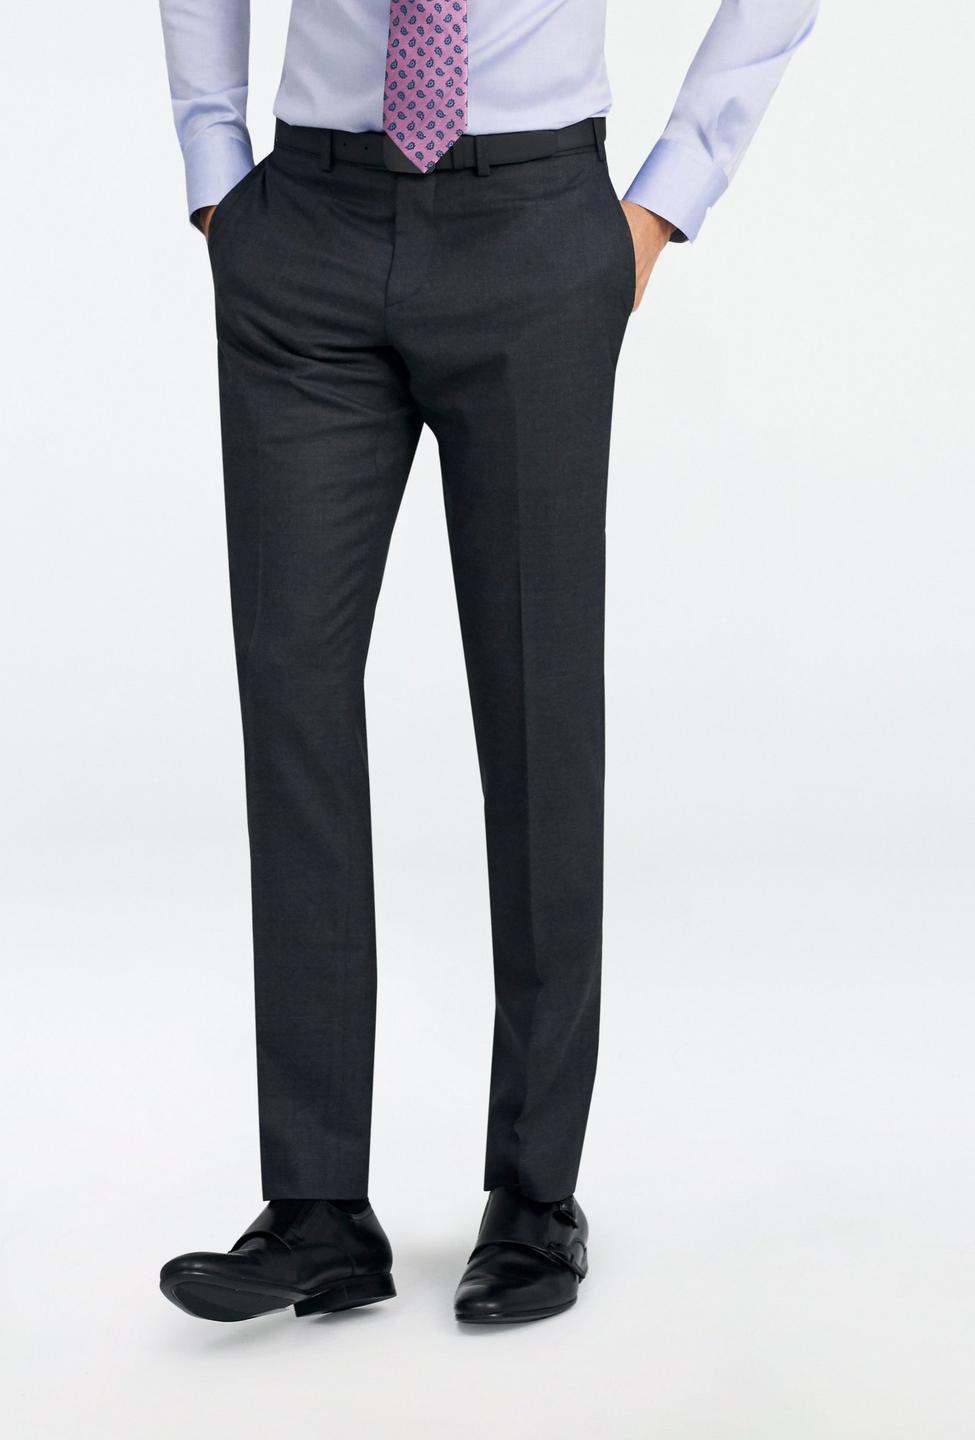 Gray pants - Hayward Solid Design from Luxury Indochino Collection